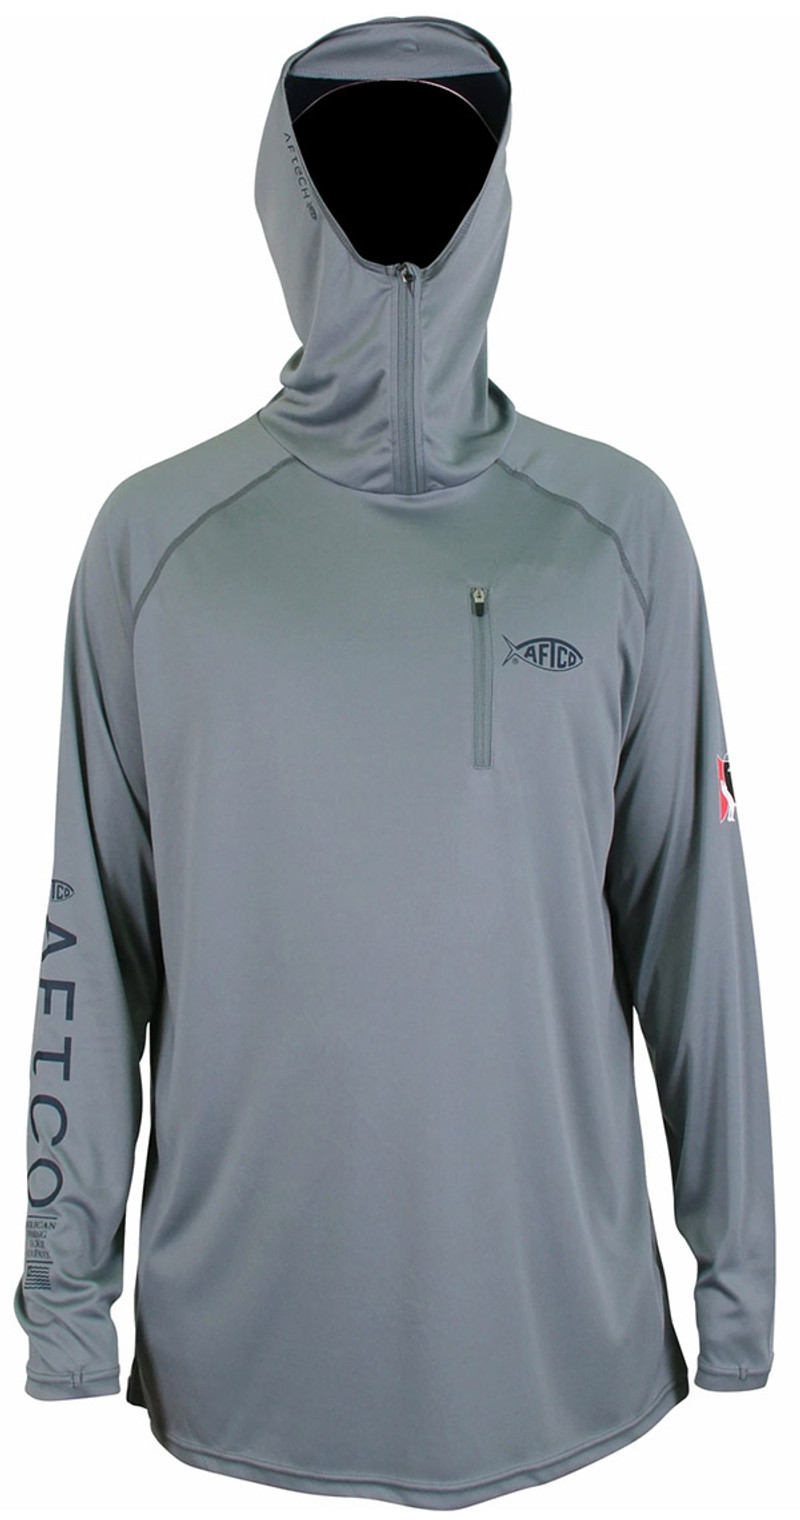 Aftco / JASON CHRISTIE HOODED LS PERFORMANCE SHIRT - Knoxville